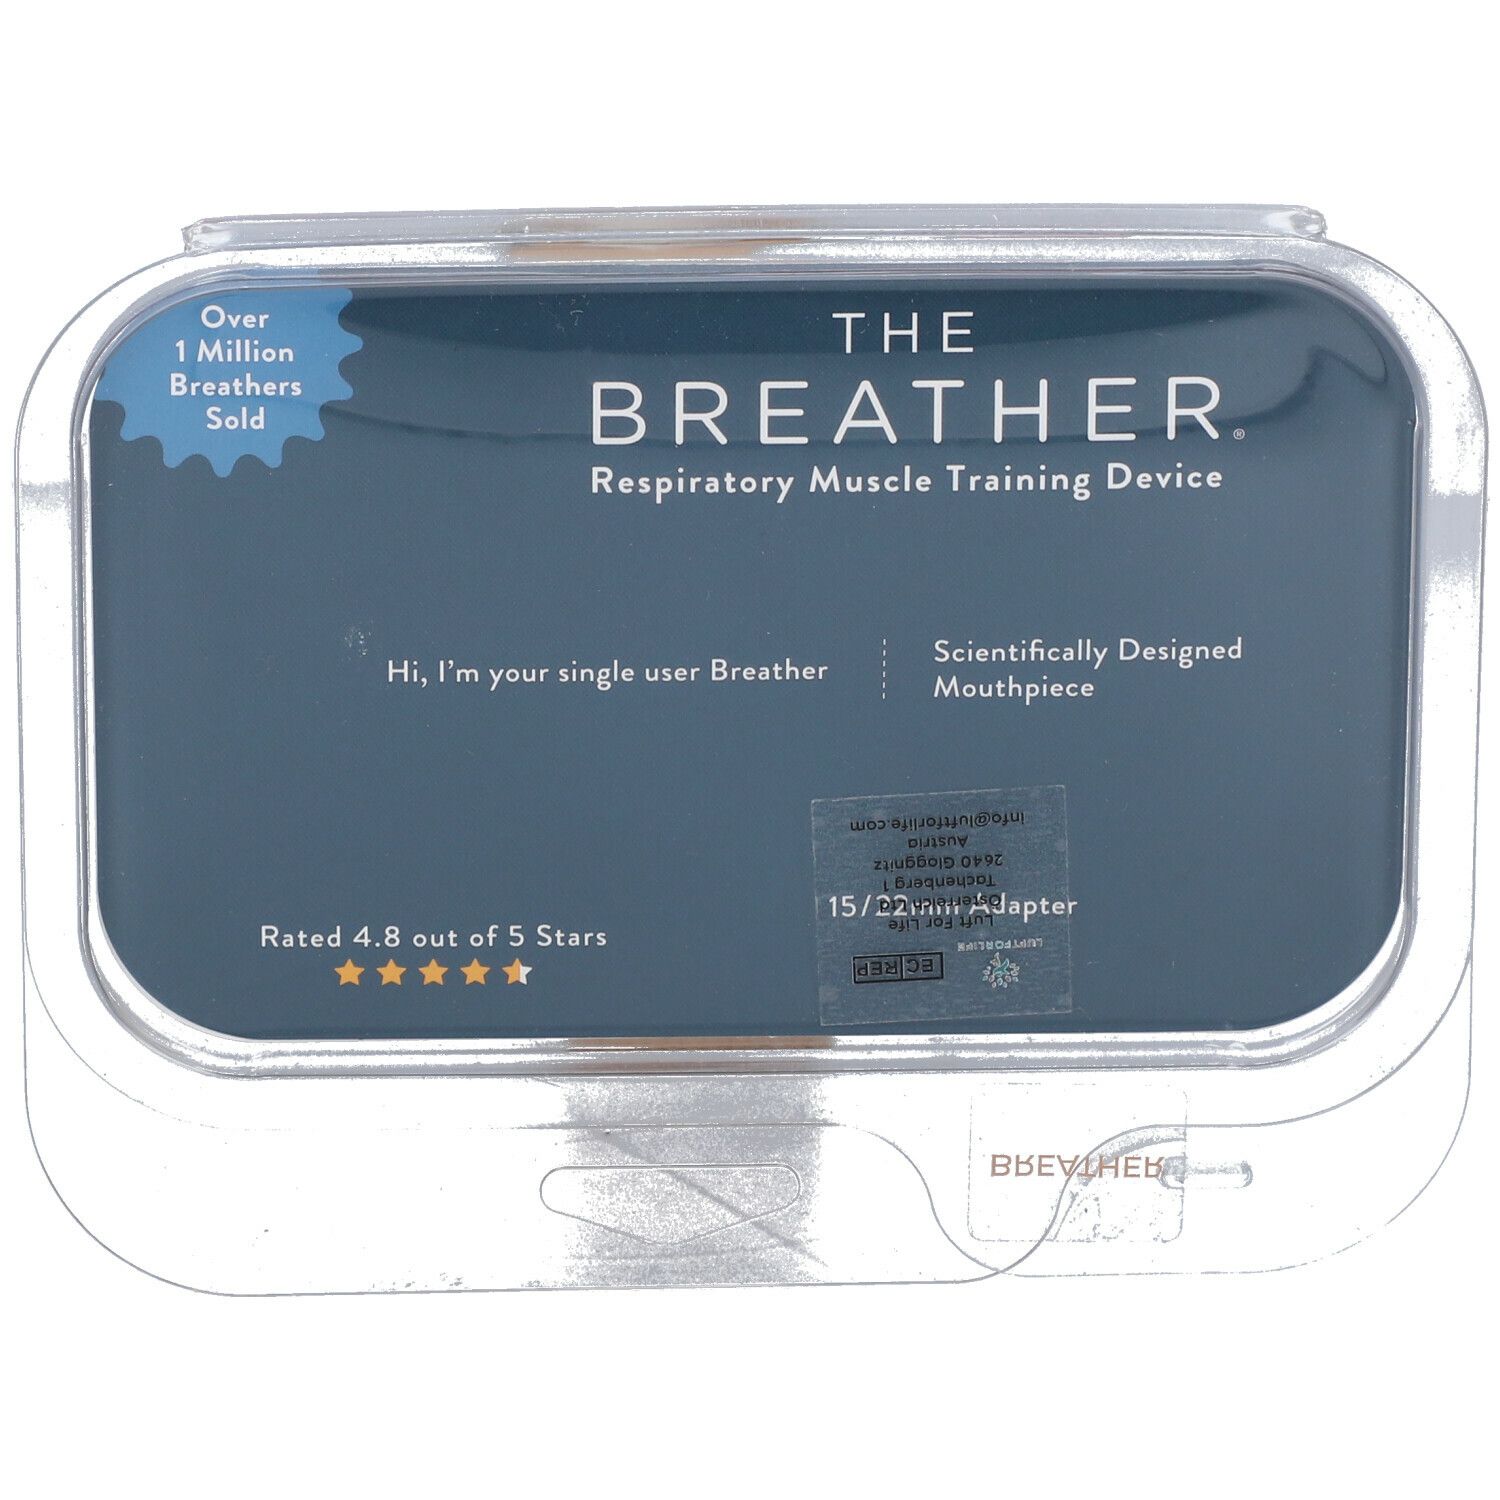 THE BREATHER®